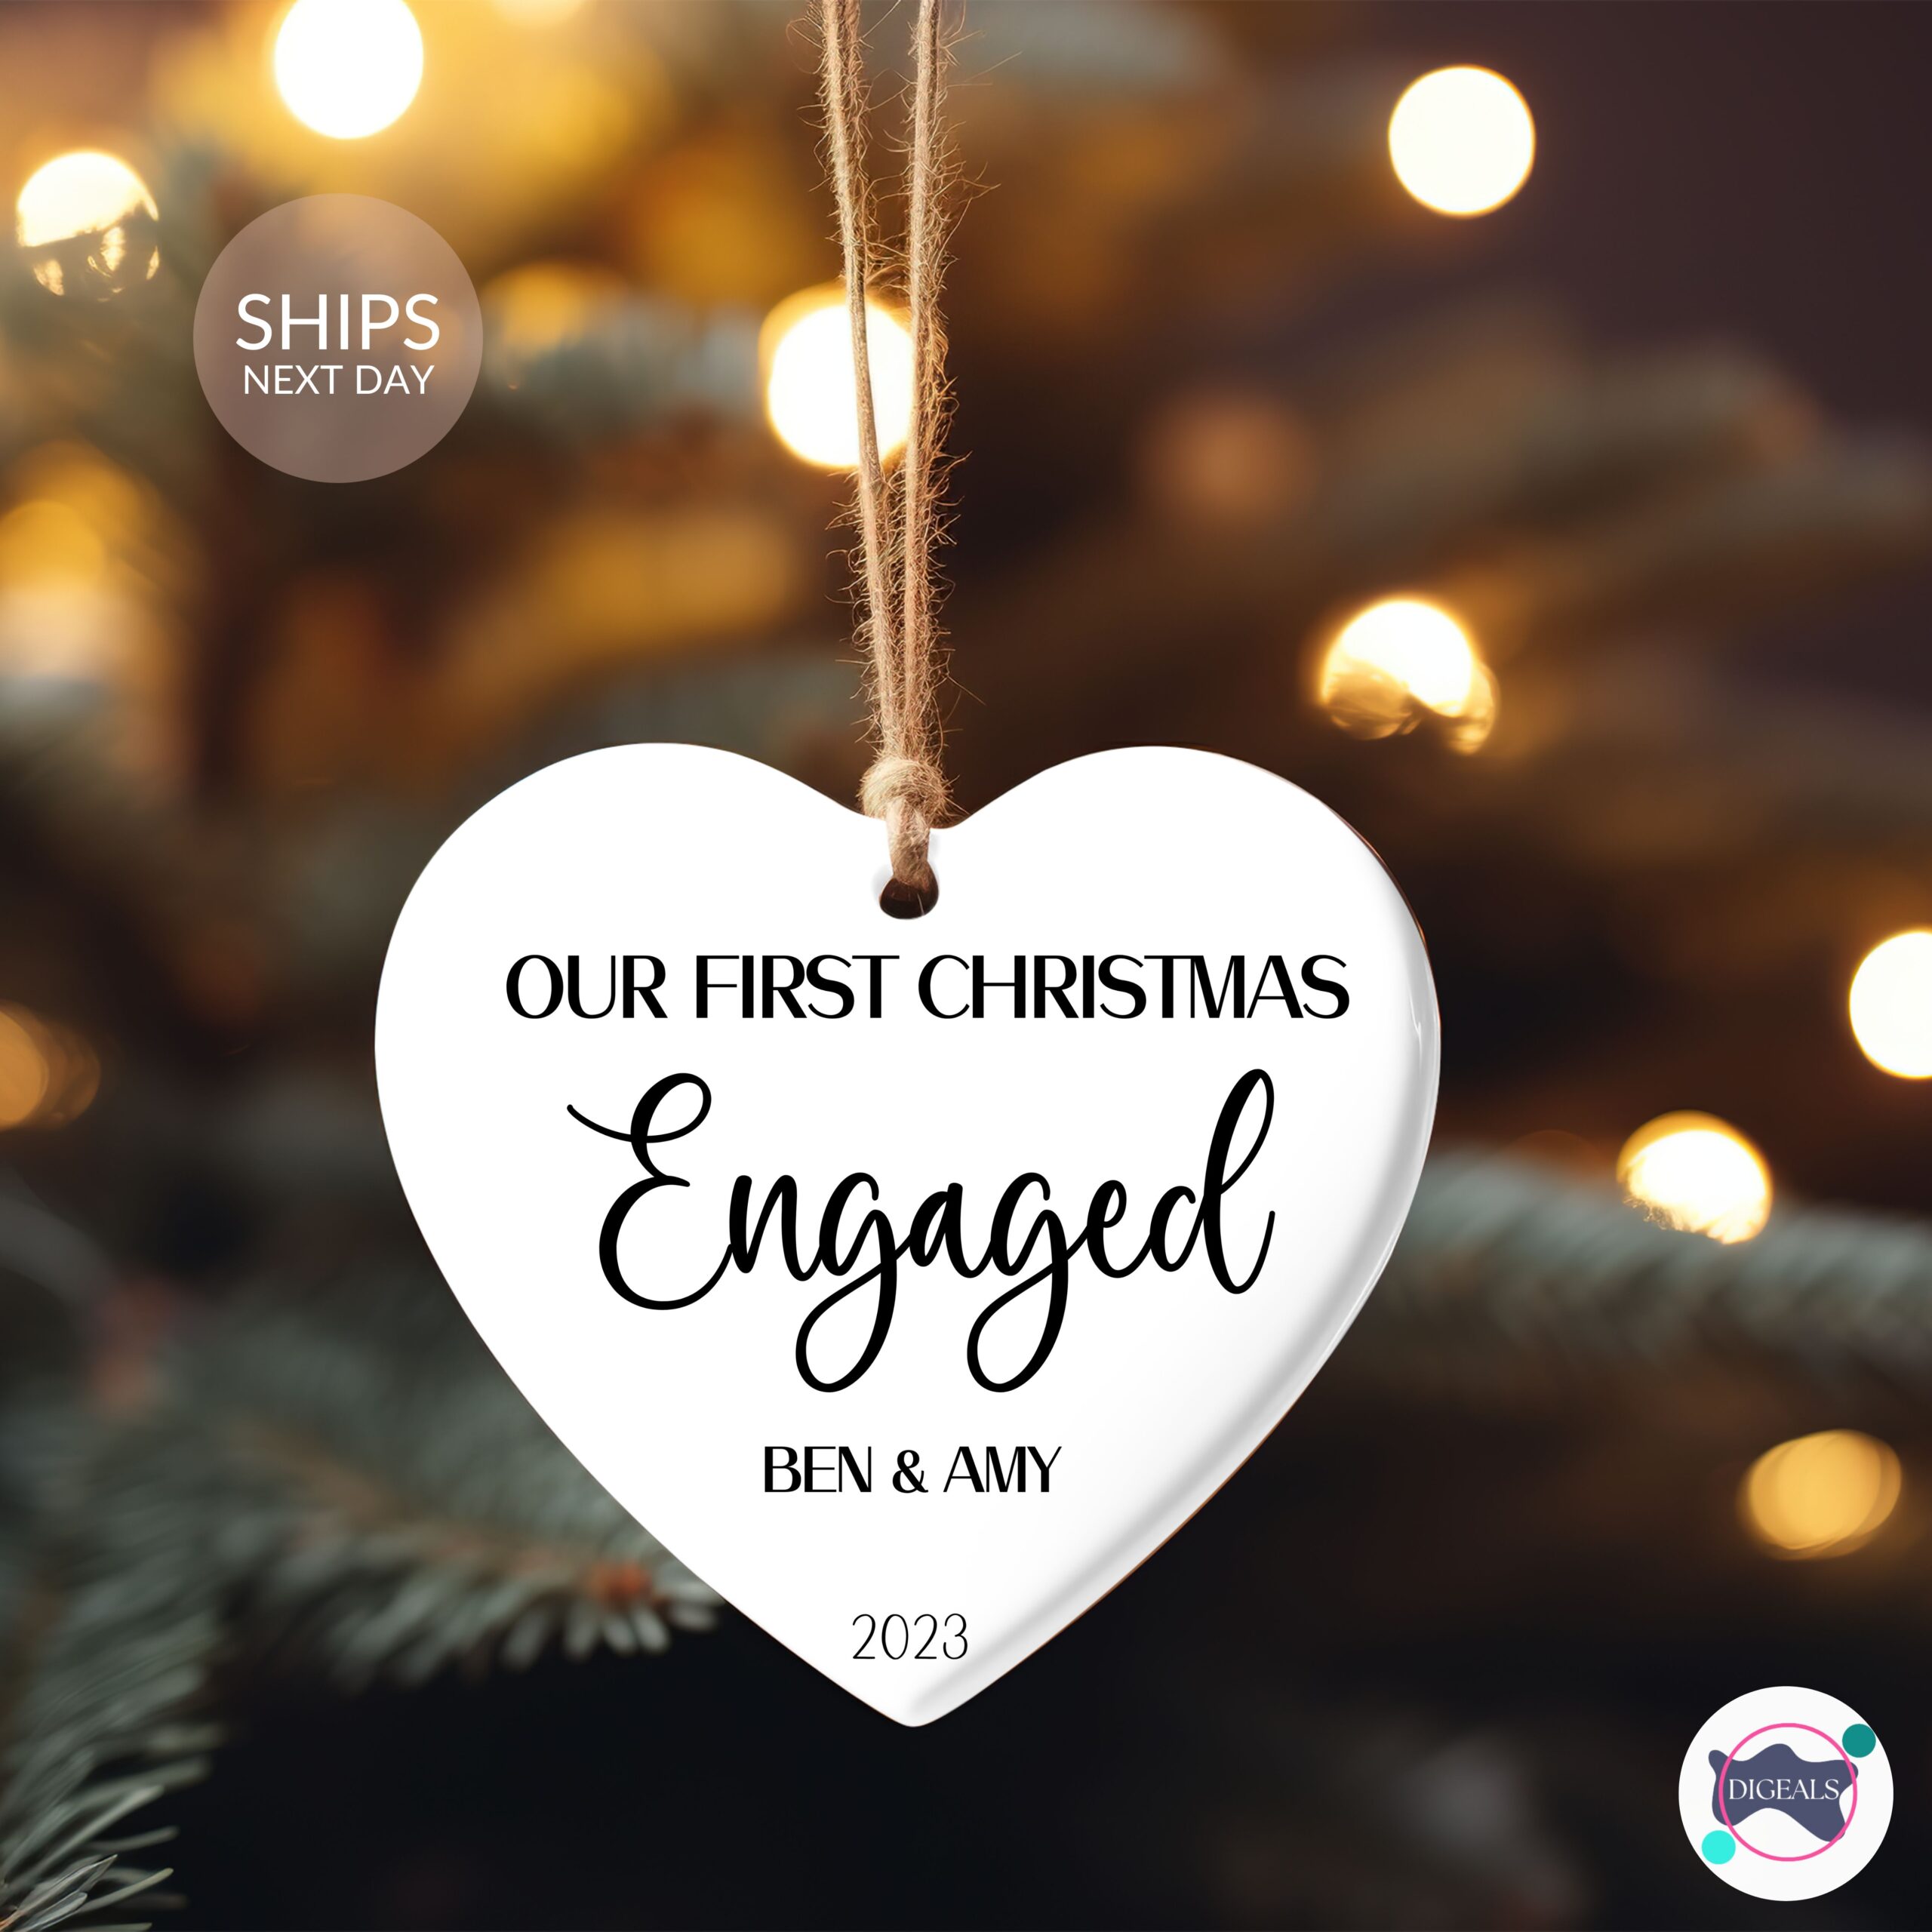 First Christmas Engaged Heart Ornament Digeals.com